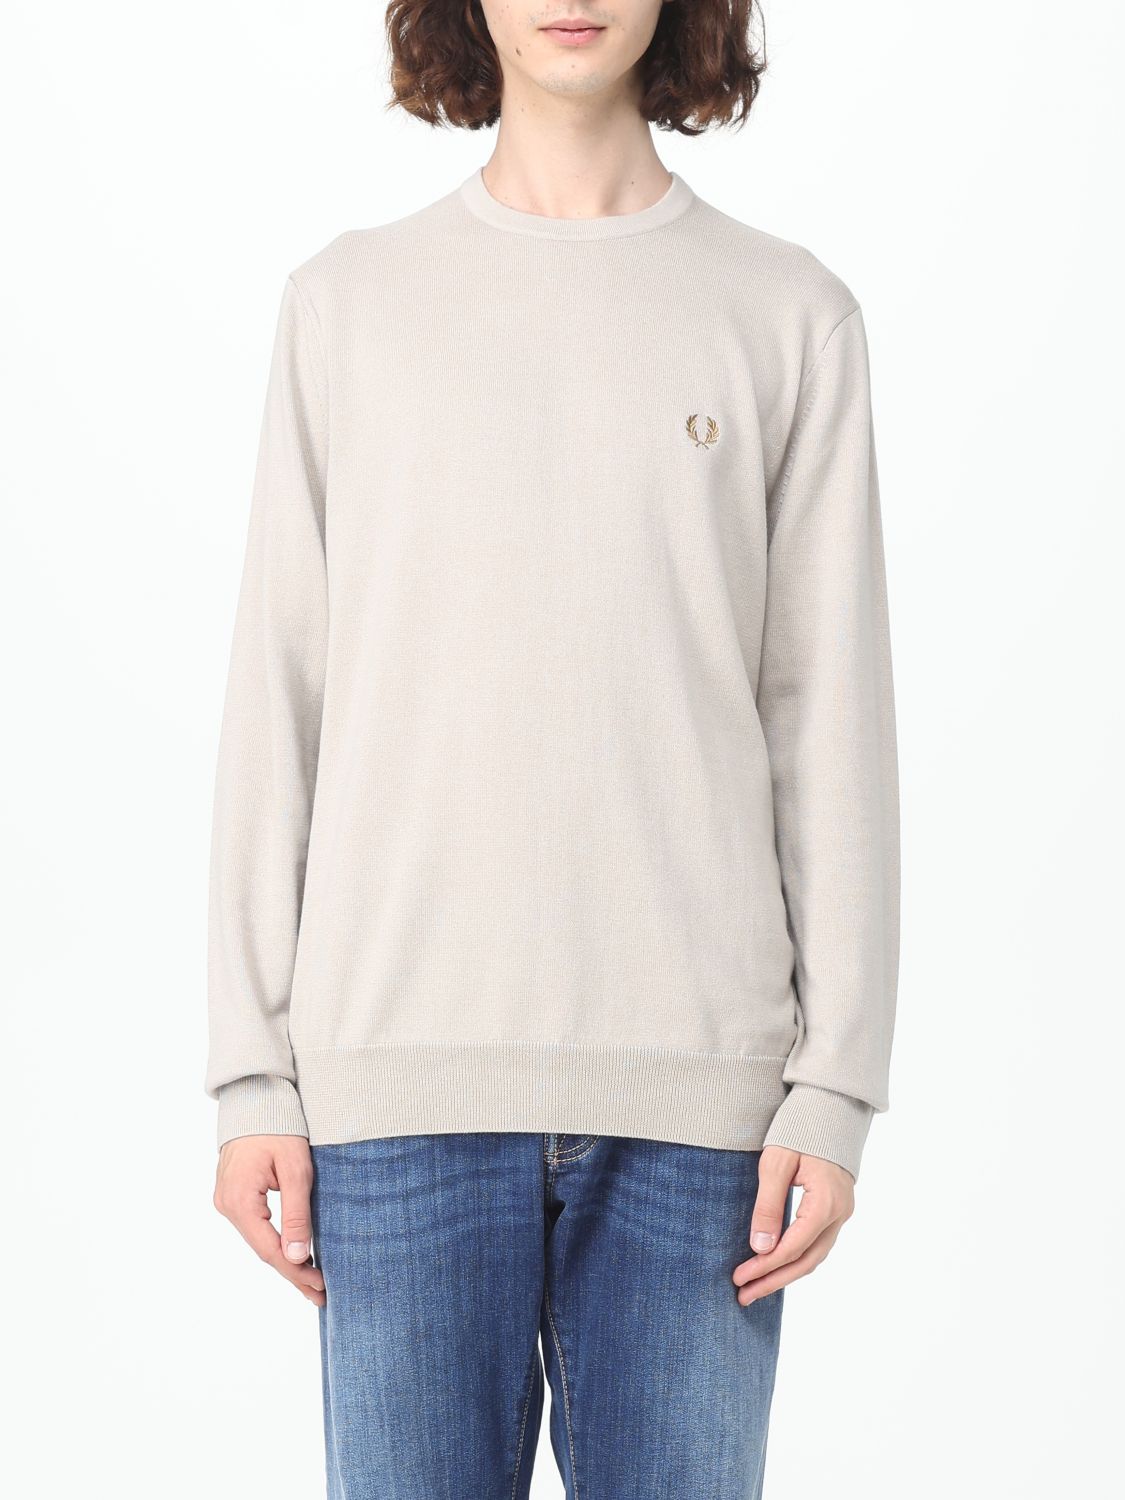 FRED PERRY: Pull homme - Noir  Pull Fred Perry K9601 en ligne sur